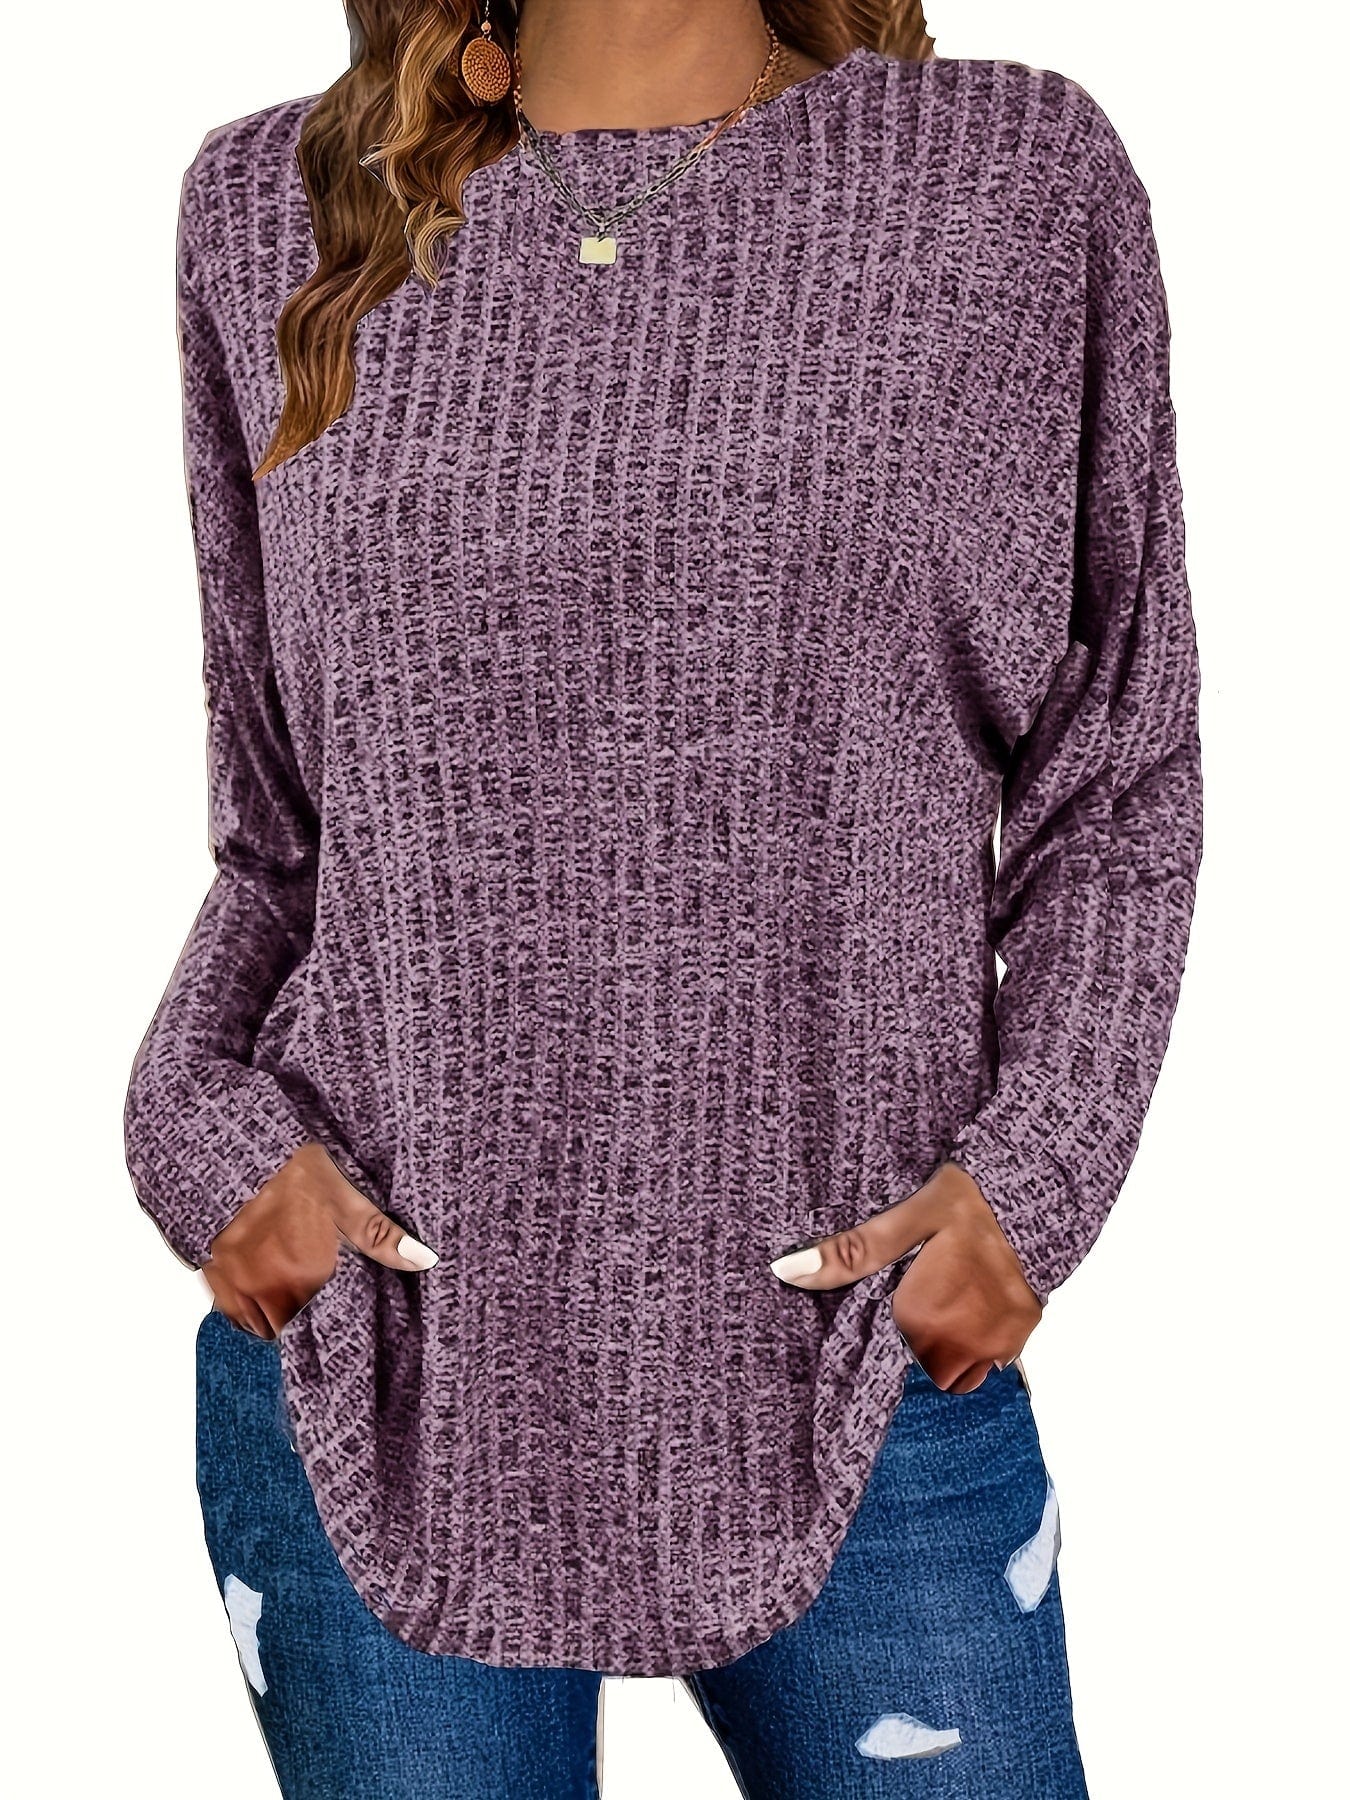 Plus Size Casual Sweater, Women's Plus Solid Ribbed Long Sleeve Round Neck Knit Top PLU2309A1601LVDPlus 1XL(14/16) Purple / Plus 1XL(14/16)